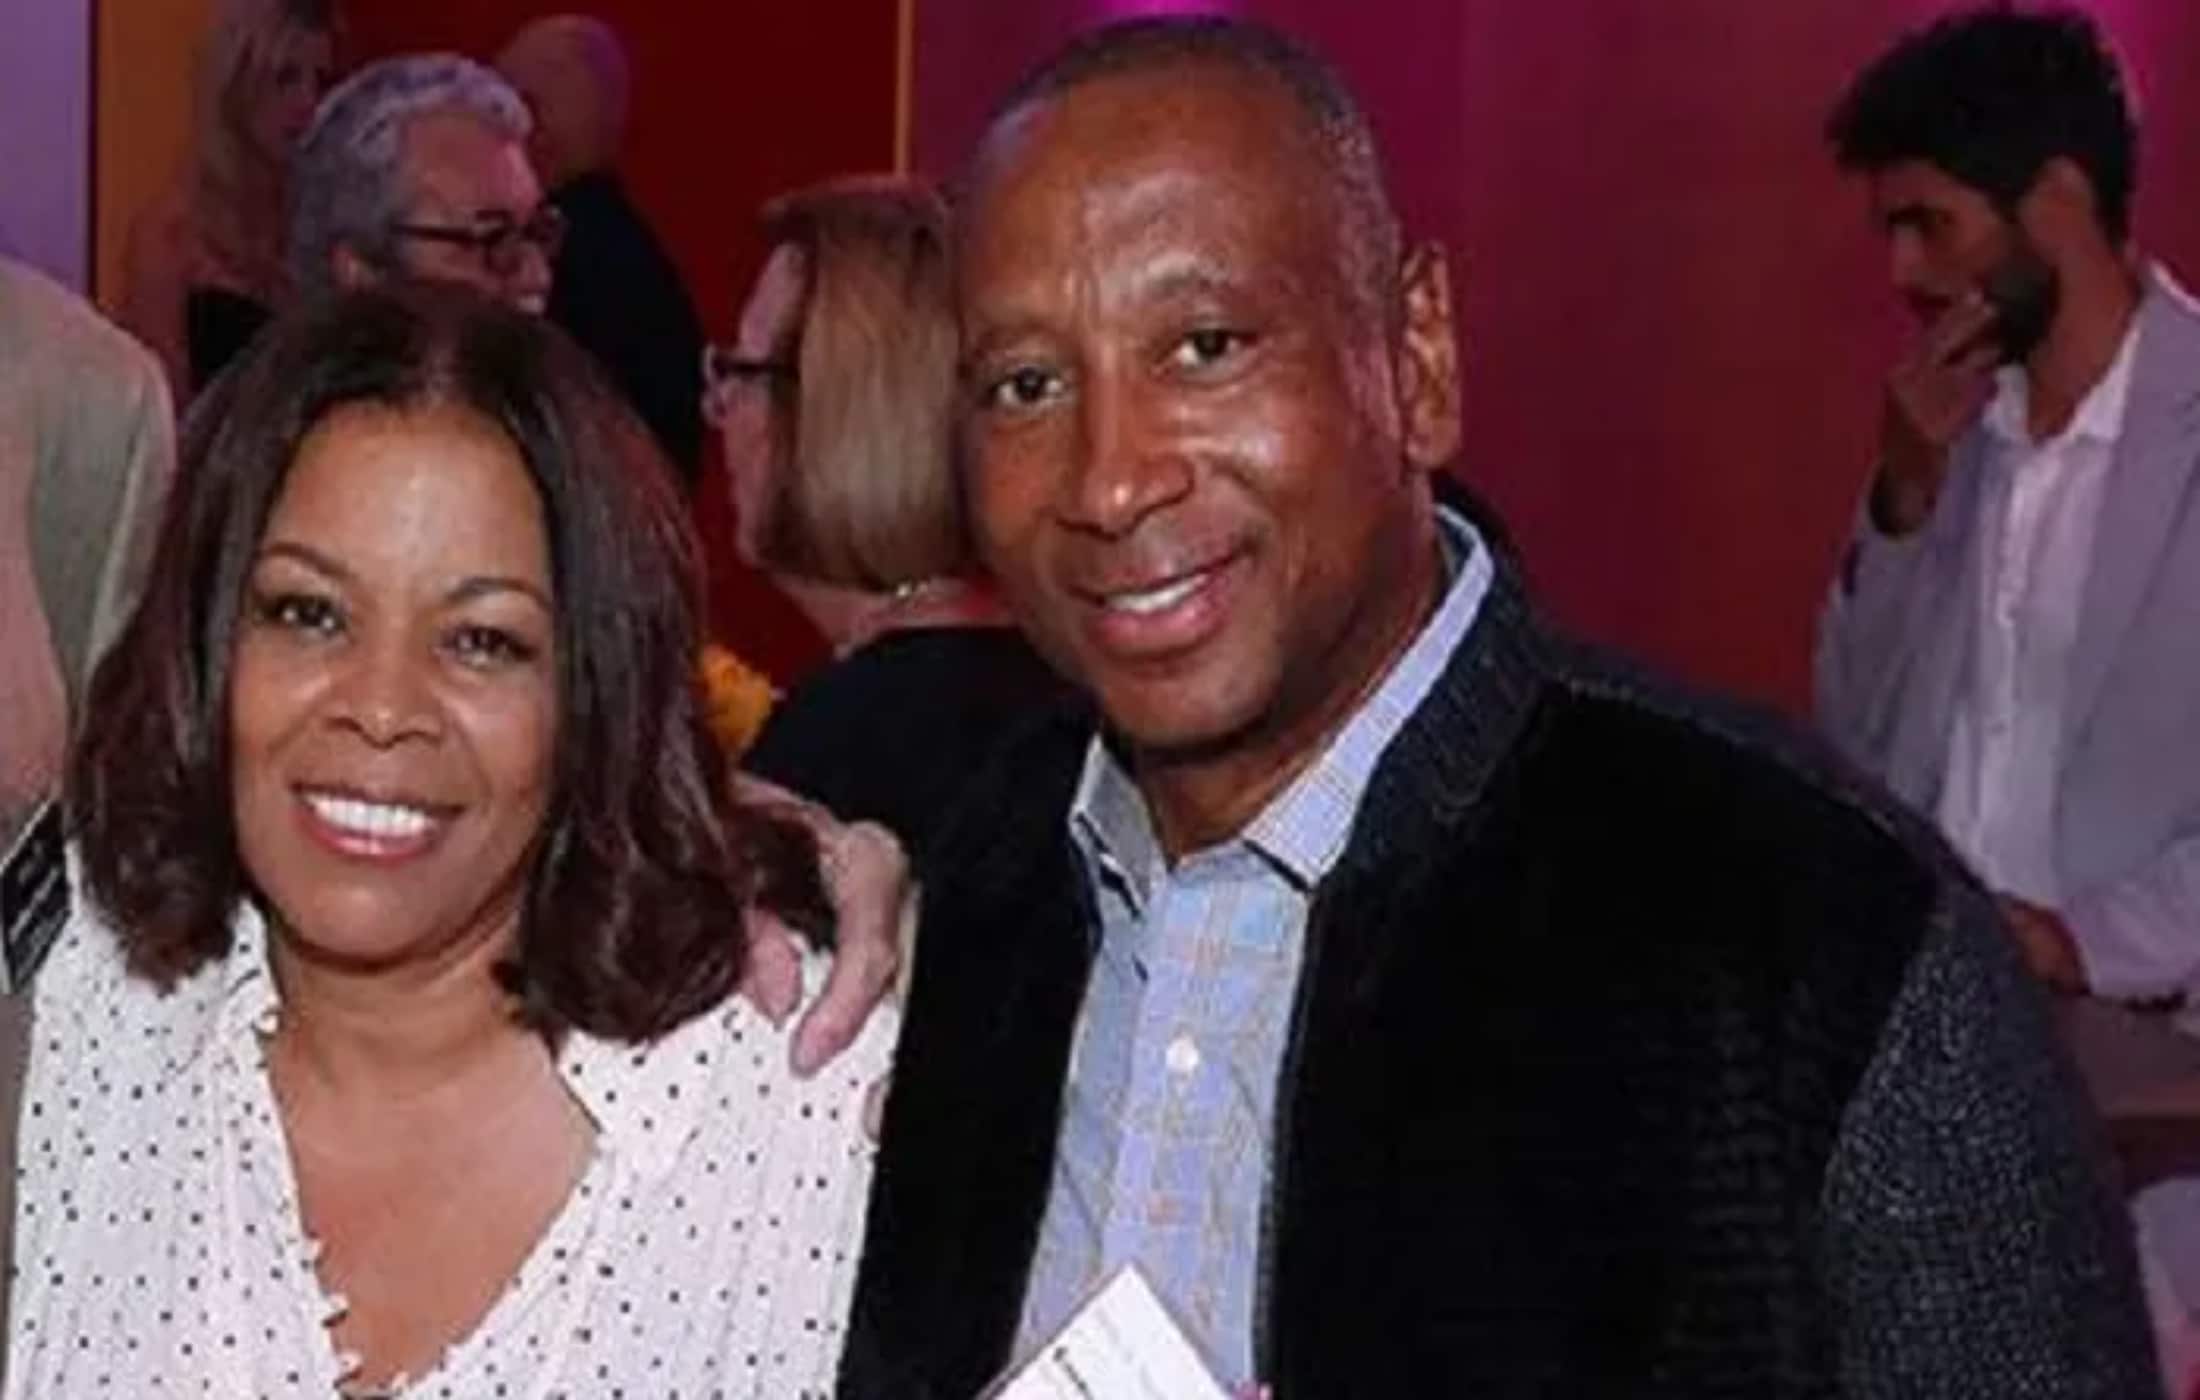 Chip Fields' Husband Erv Hurd Biography: Age, Net Worth, Wife, Salary, Instagram, Movies, Pictures